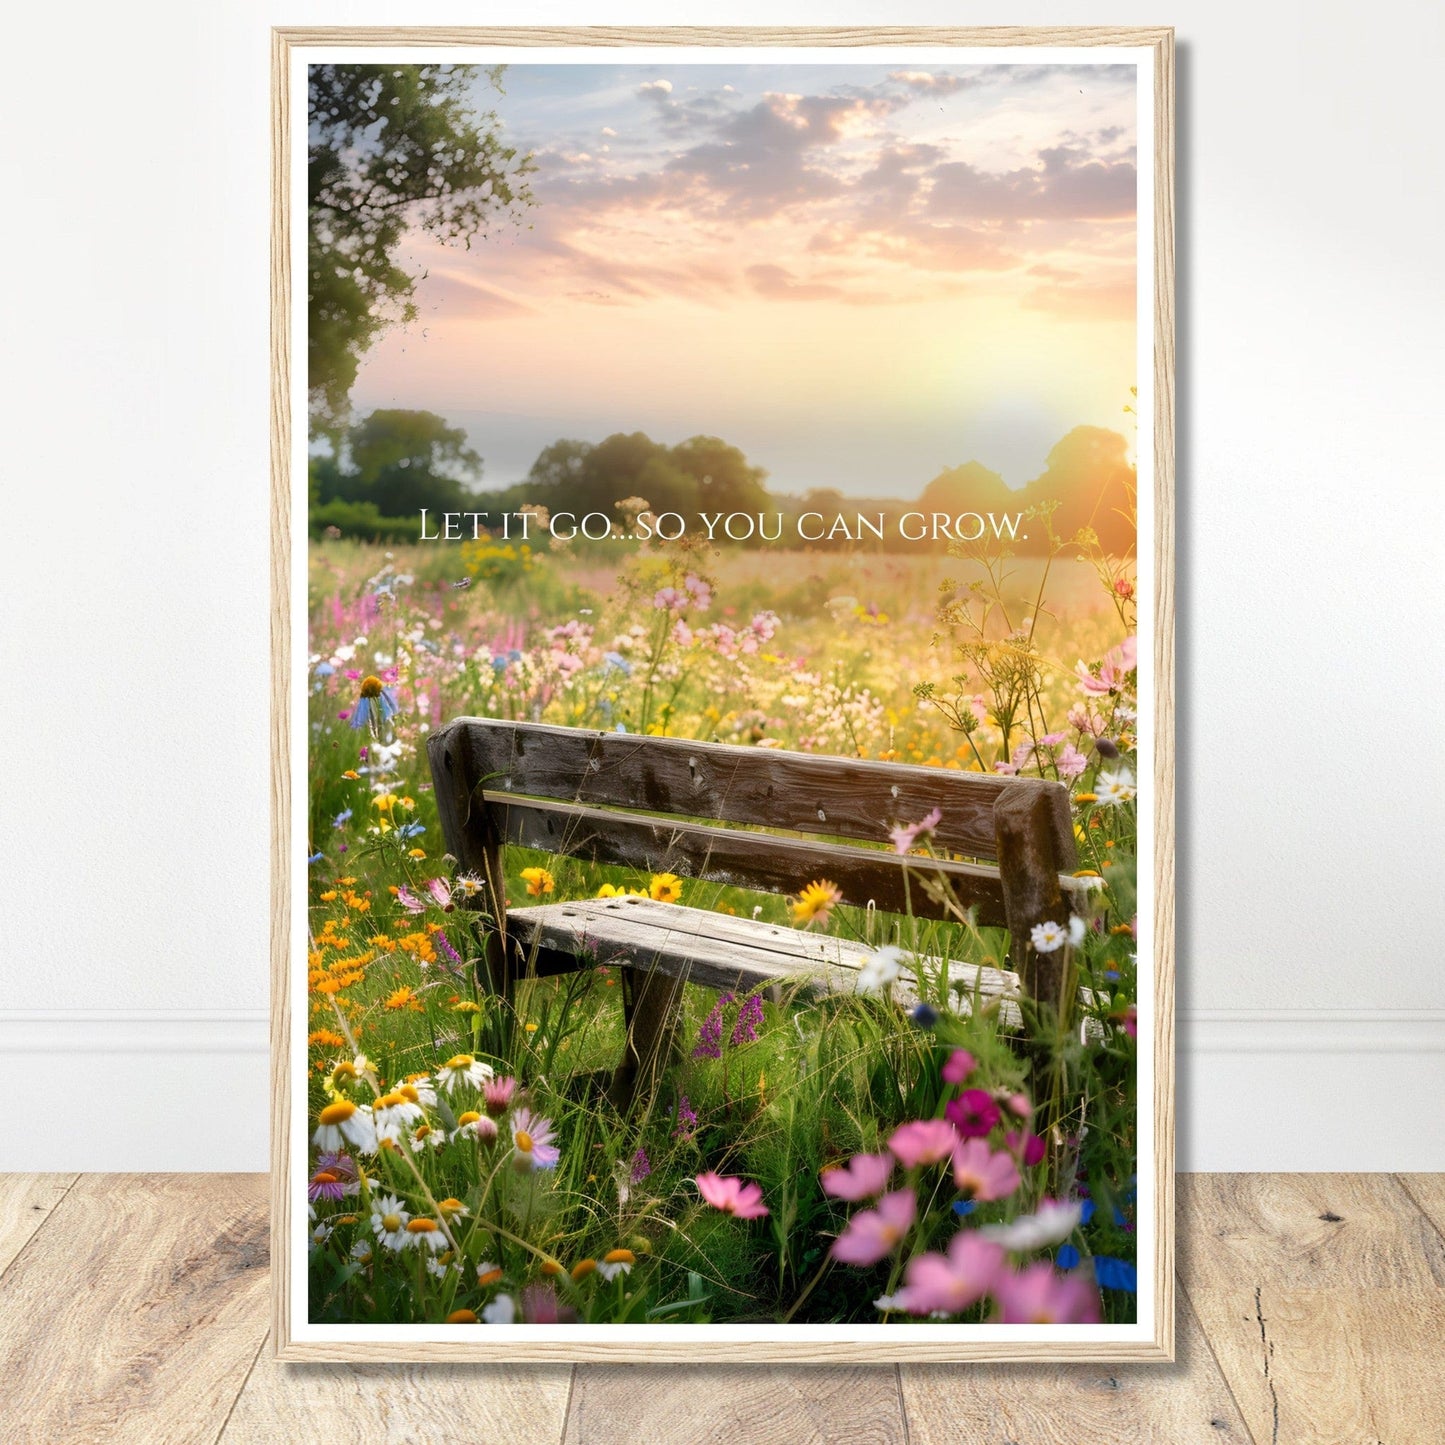 Coffee With My Father Print Material 60x90 cm / 24x36″ / Premium Matte Paper Wooden Framed Poster / Wood frame Grow - Artwork